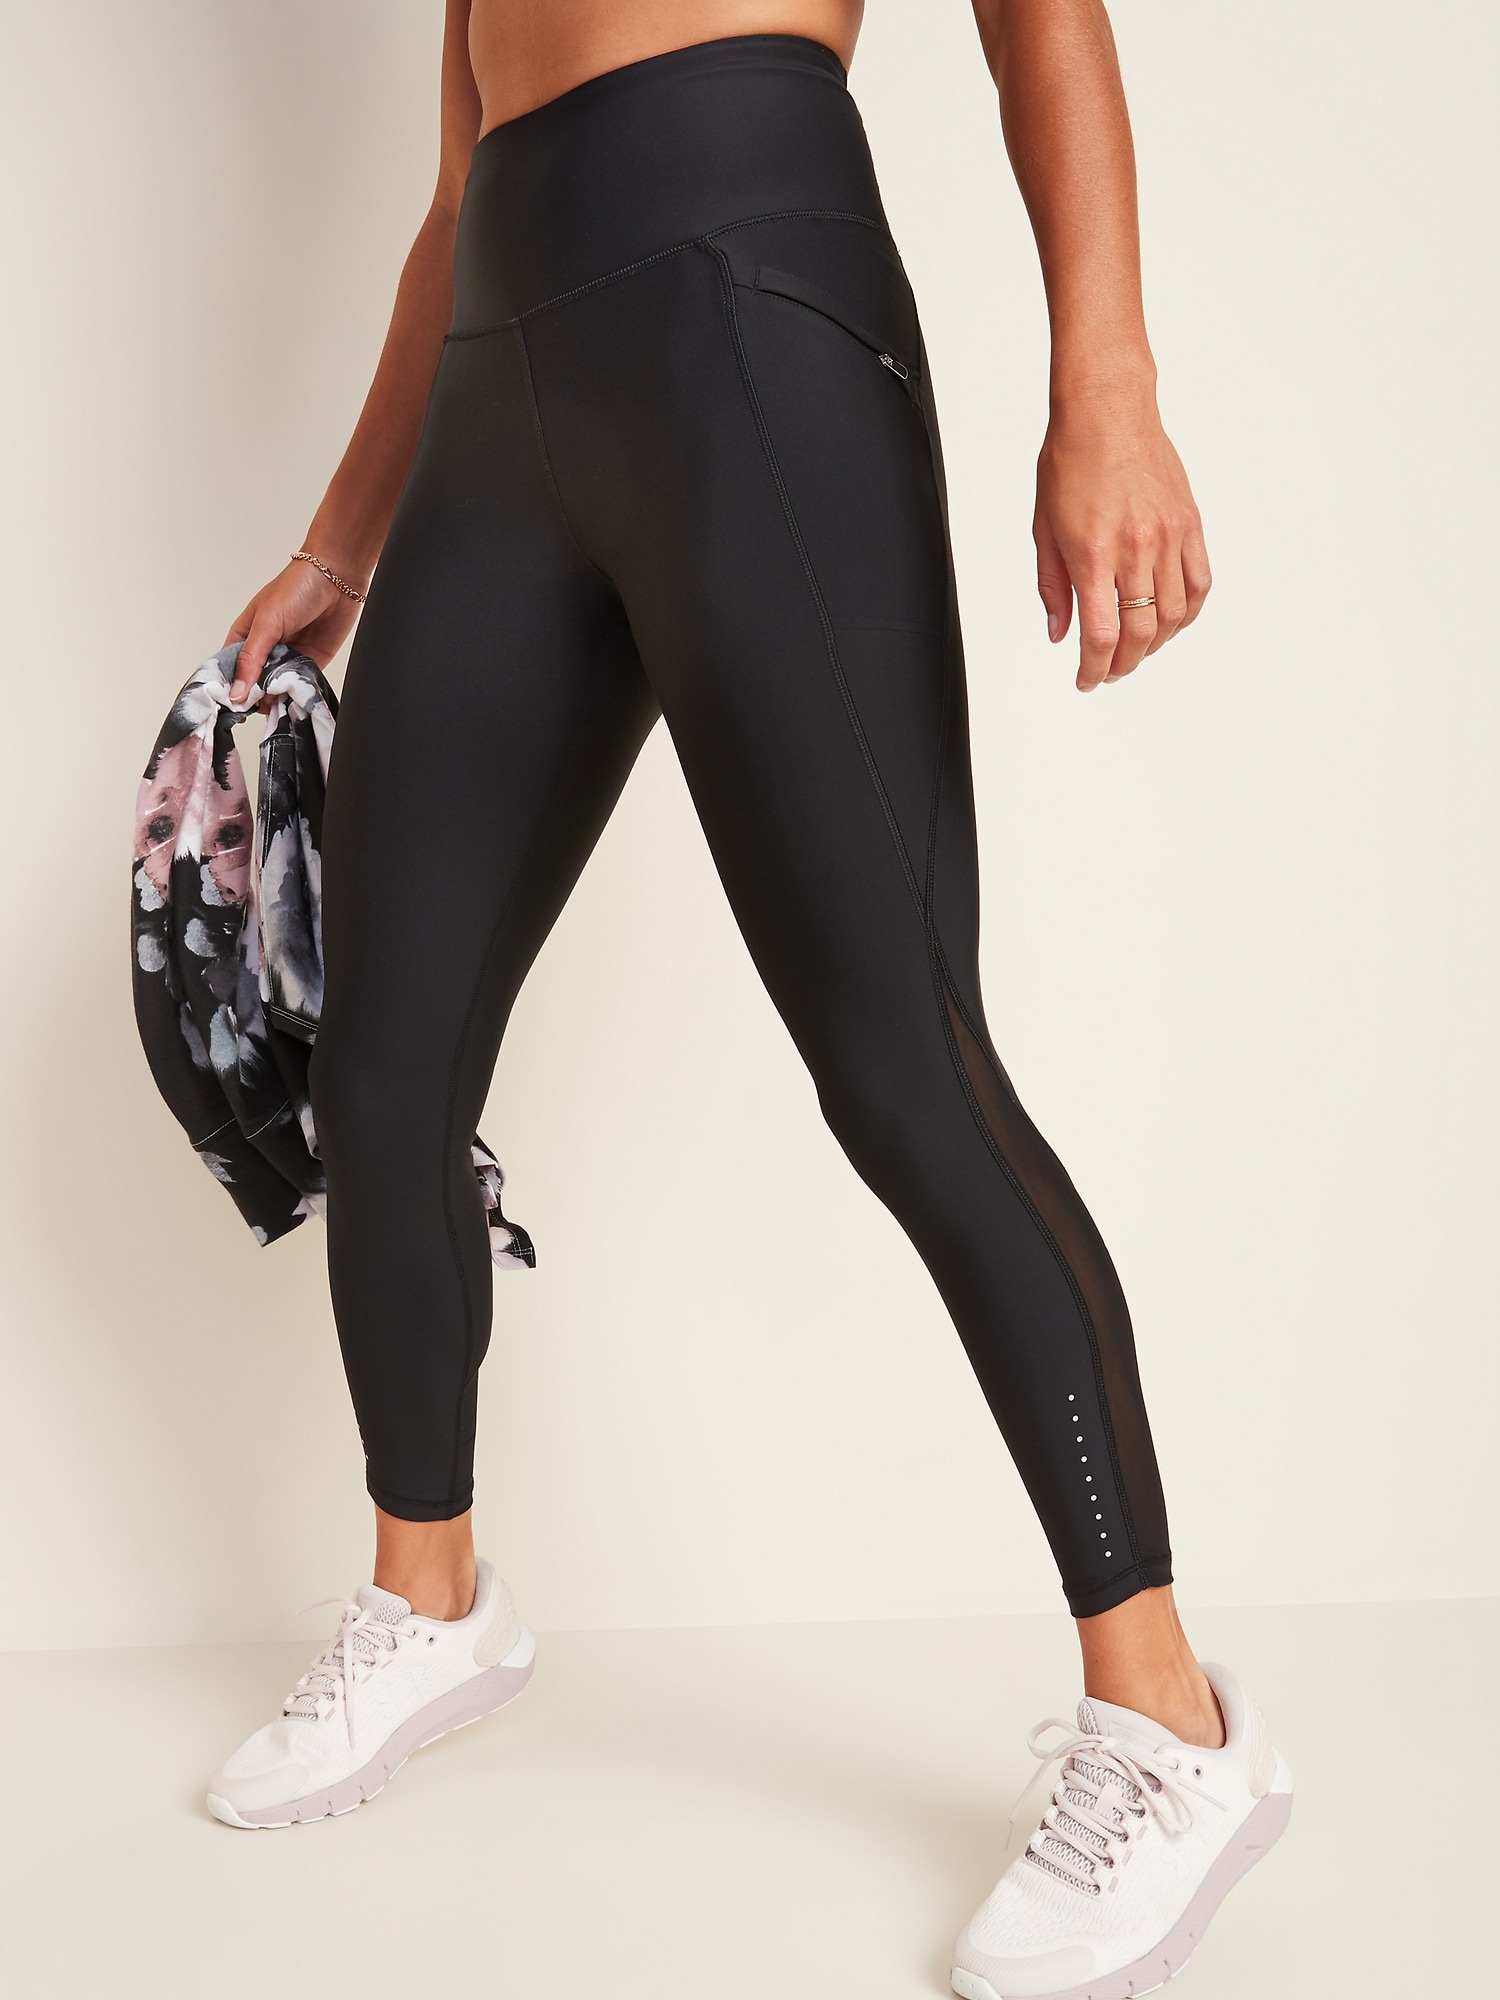 Yvette Leggings with Pockets for Women,High Waisted Tummy Control